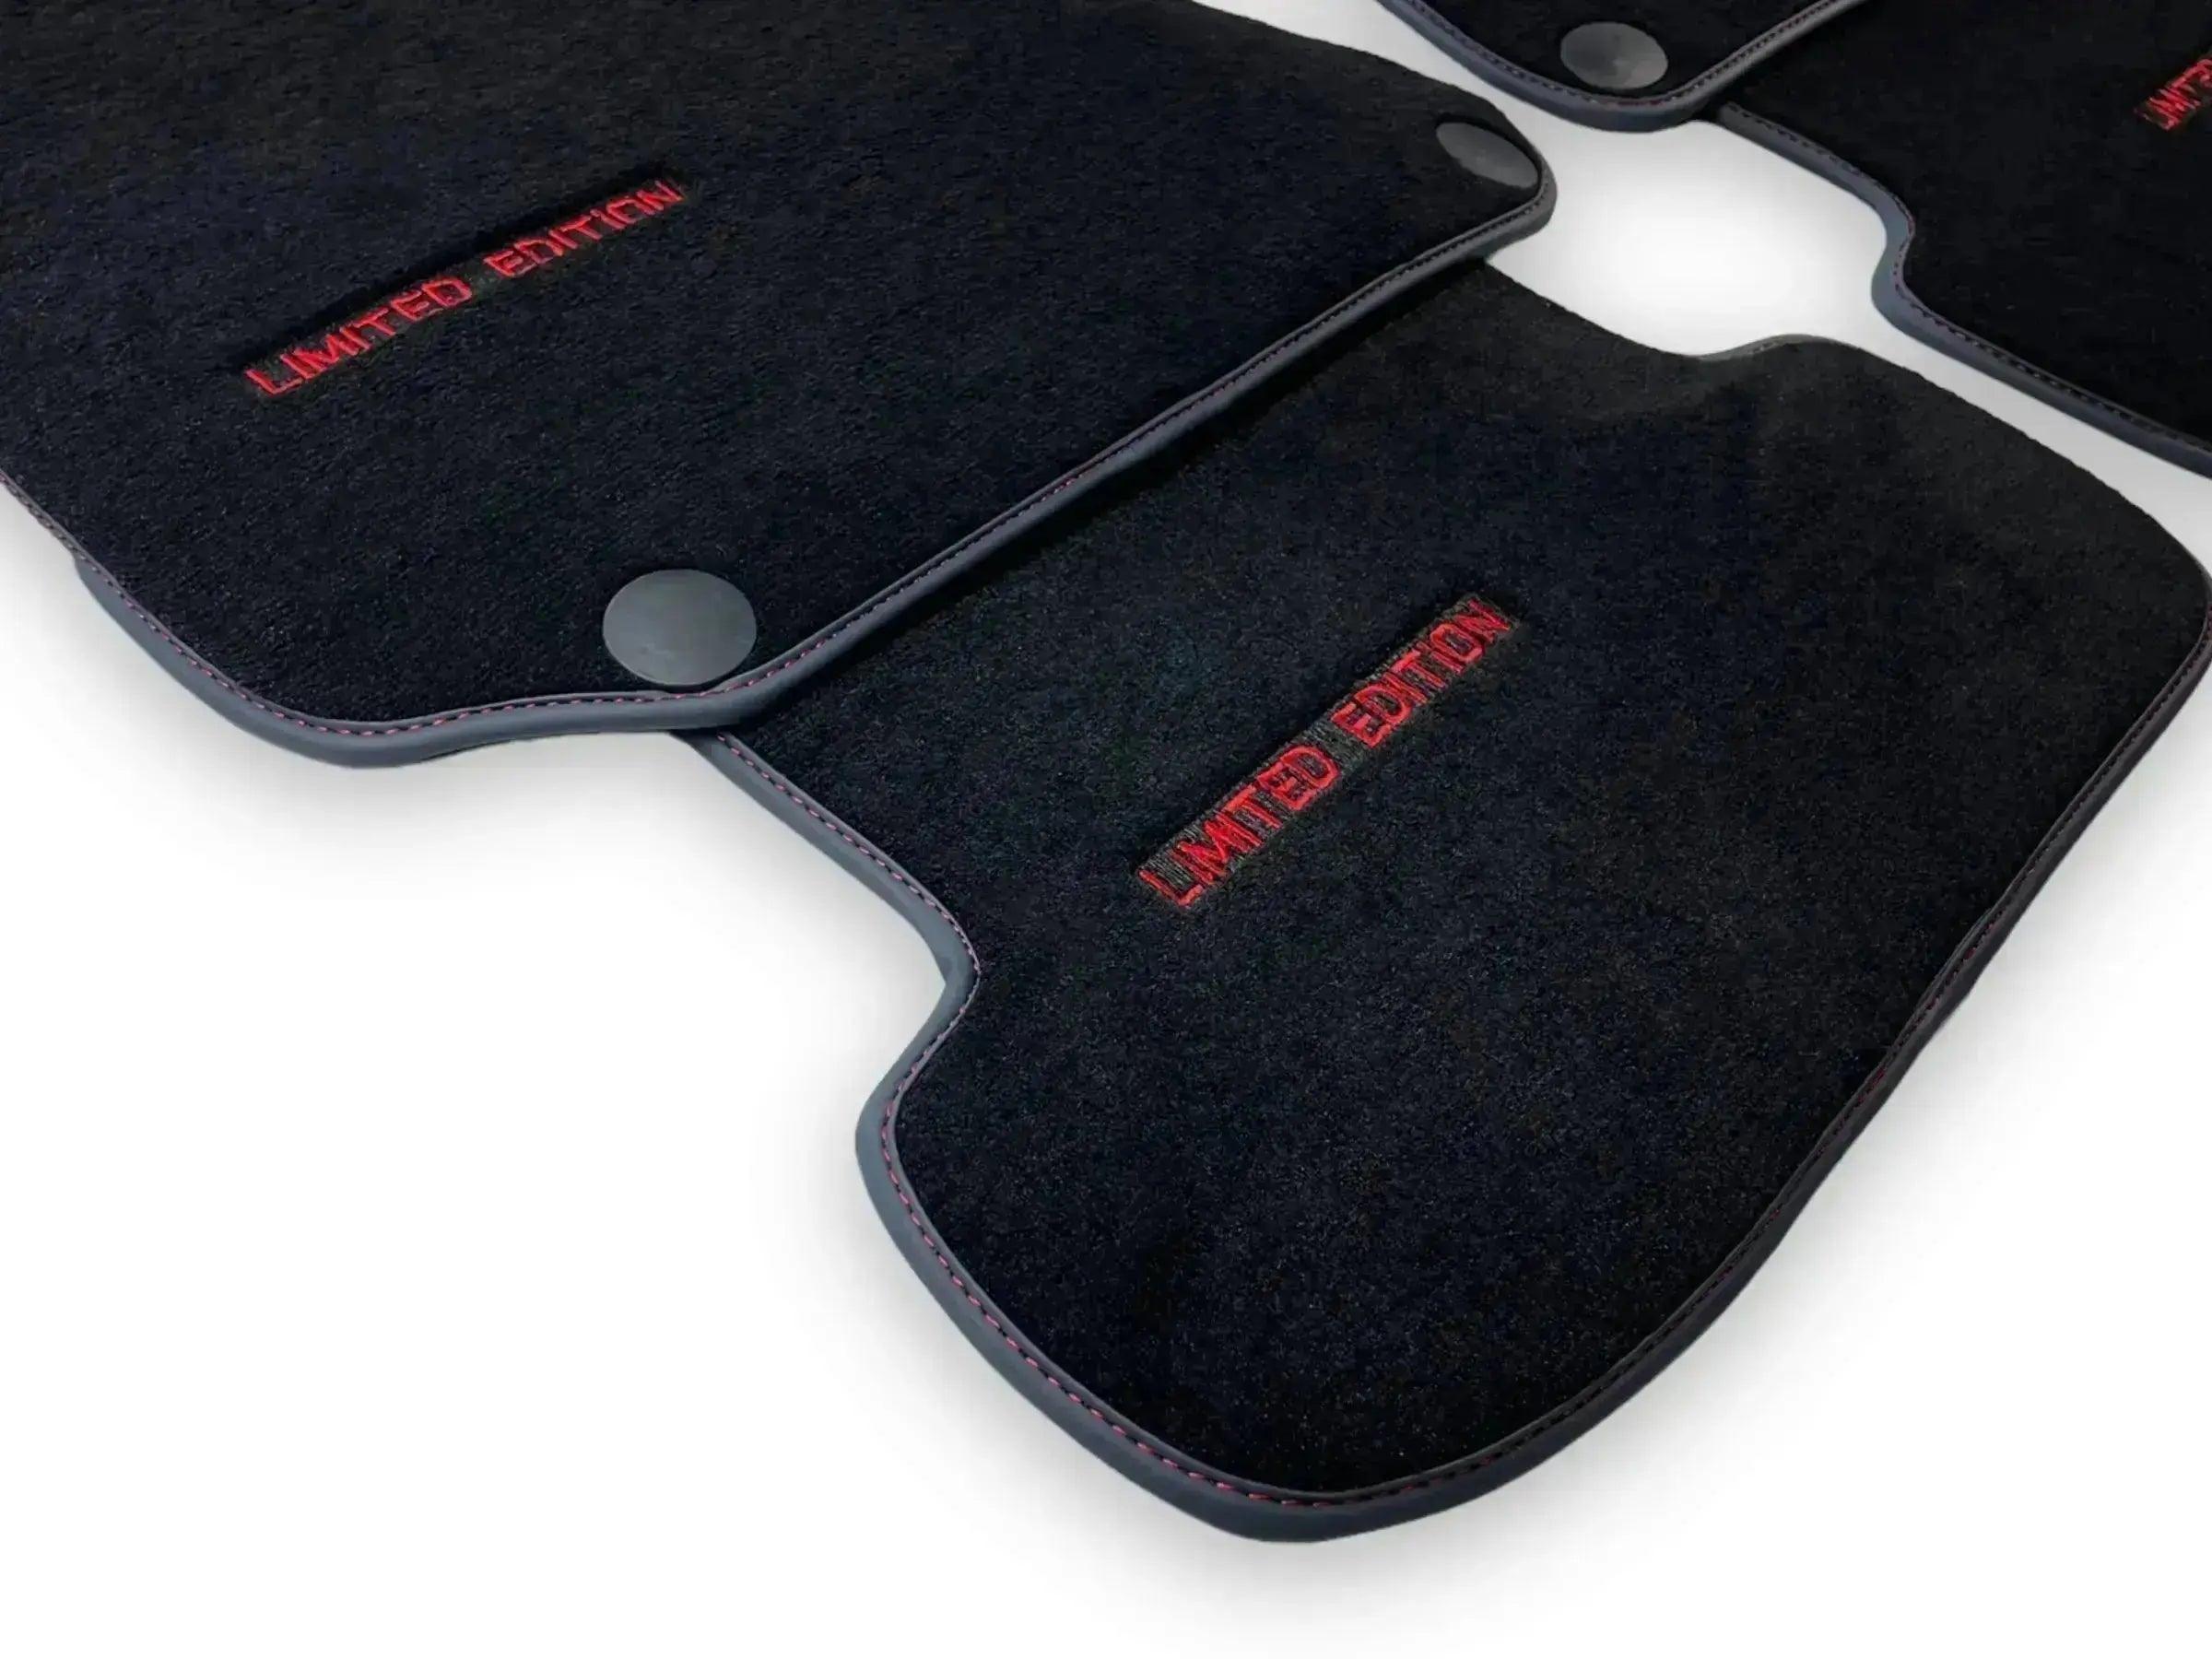 Black Floor Mats For Mercedes Benz GLE-Class C167 Coupe - 5 Seats (2020-2023) Hybrid | Limited Edition